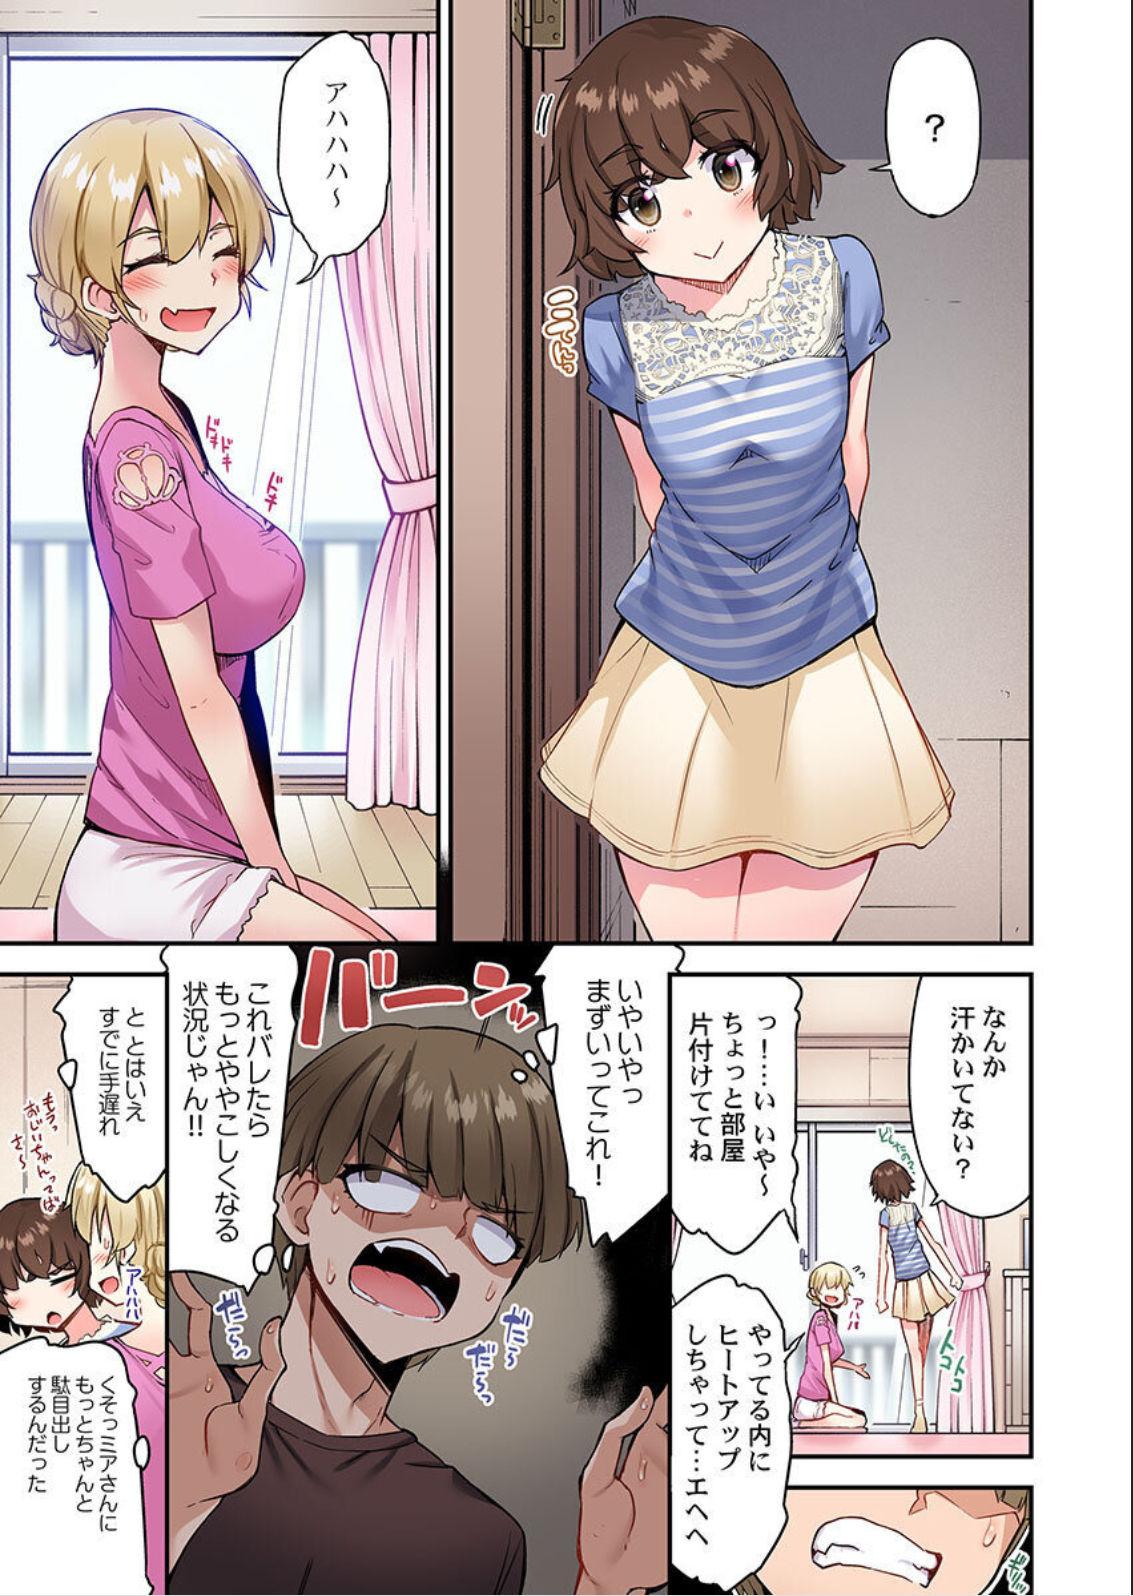 Traditional Job Of Washing Girls' Body Ch. 45-51 and brand new CH. 57 1